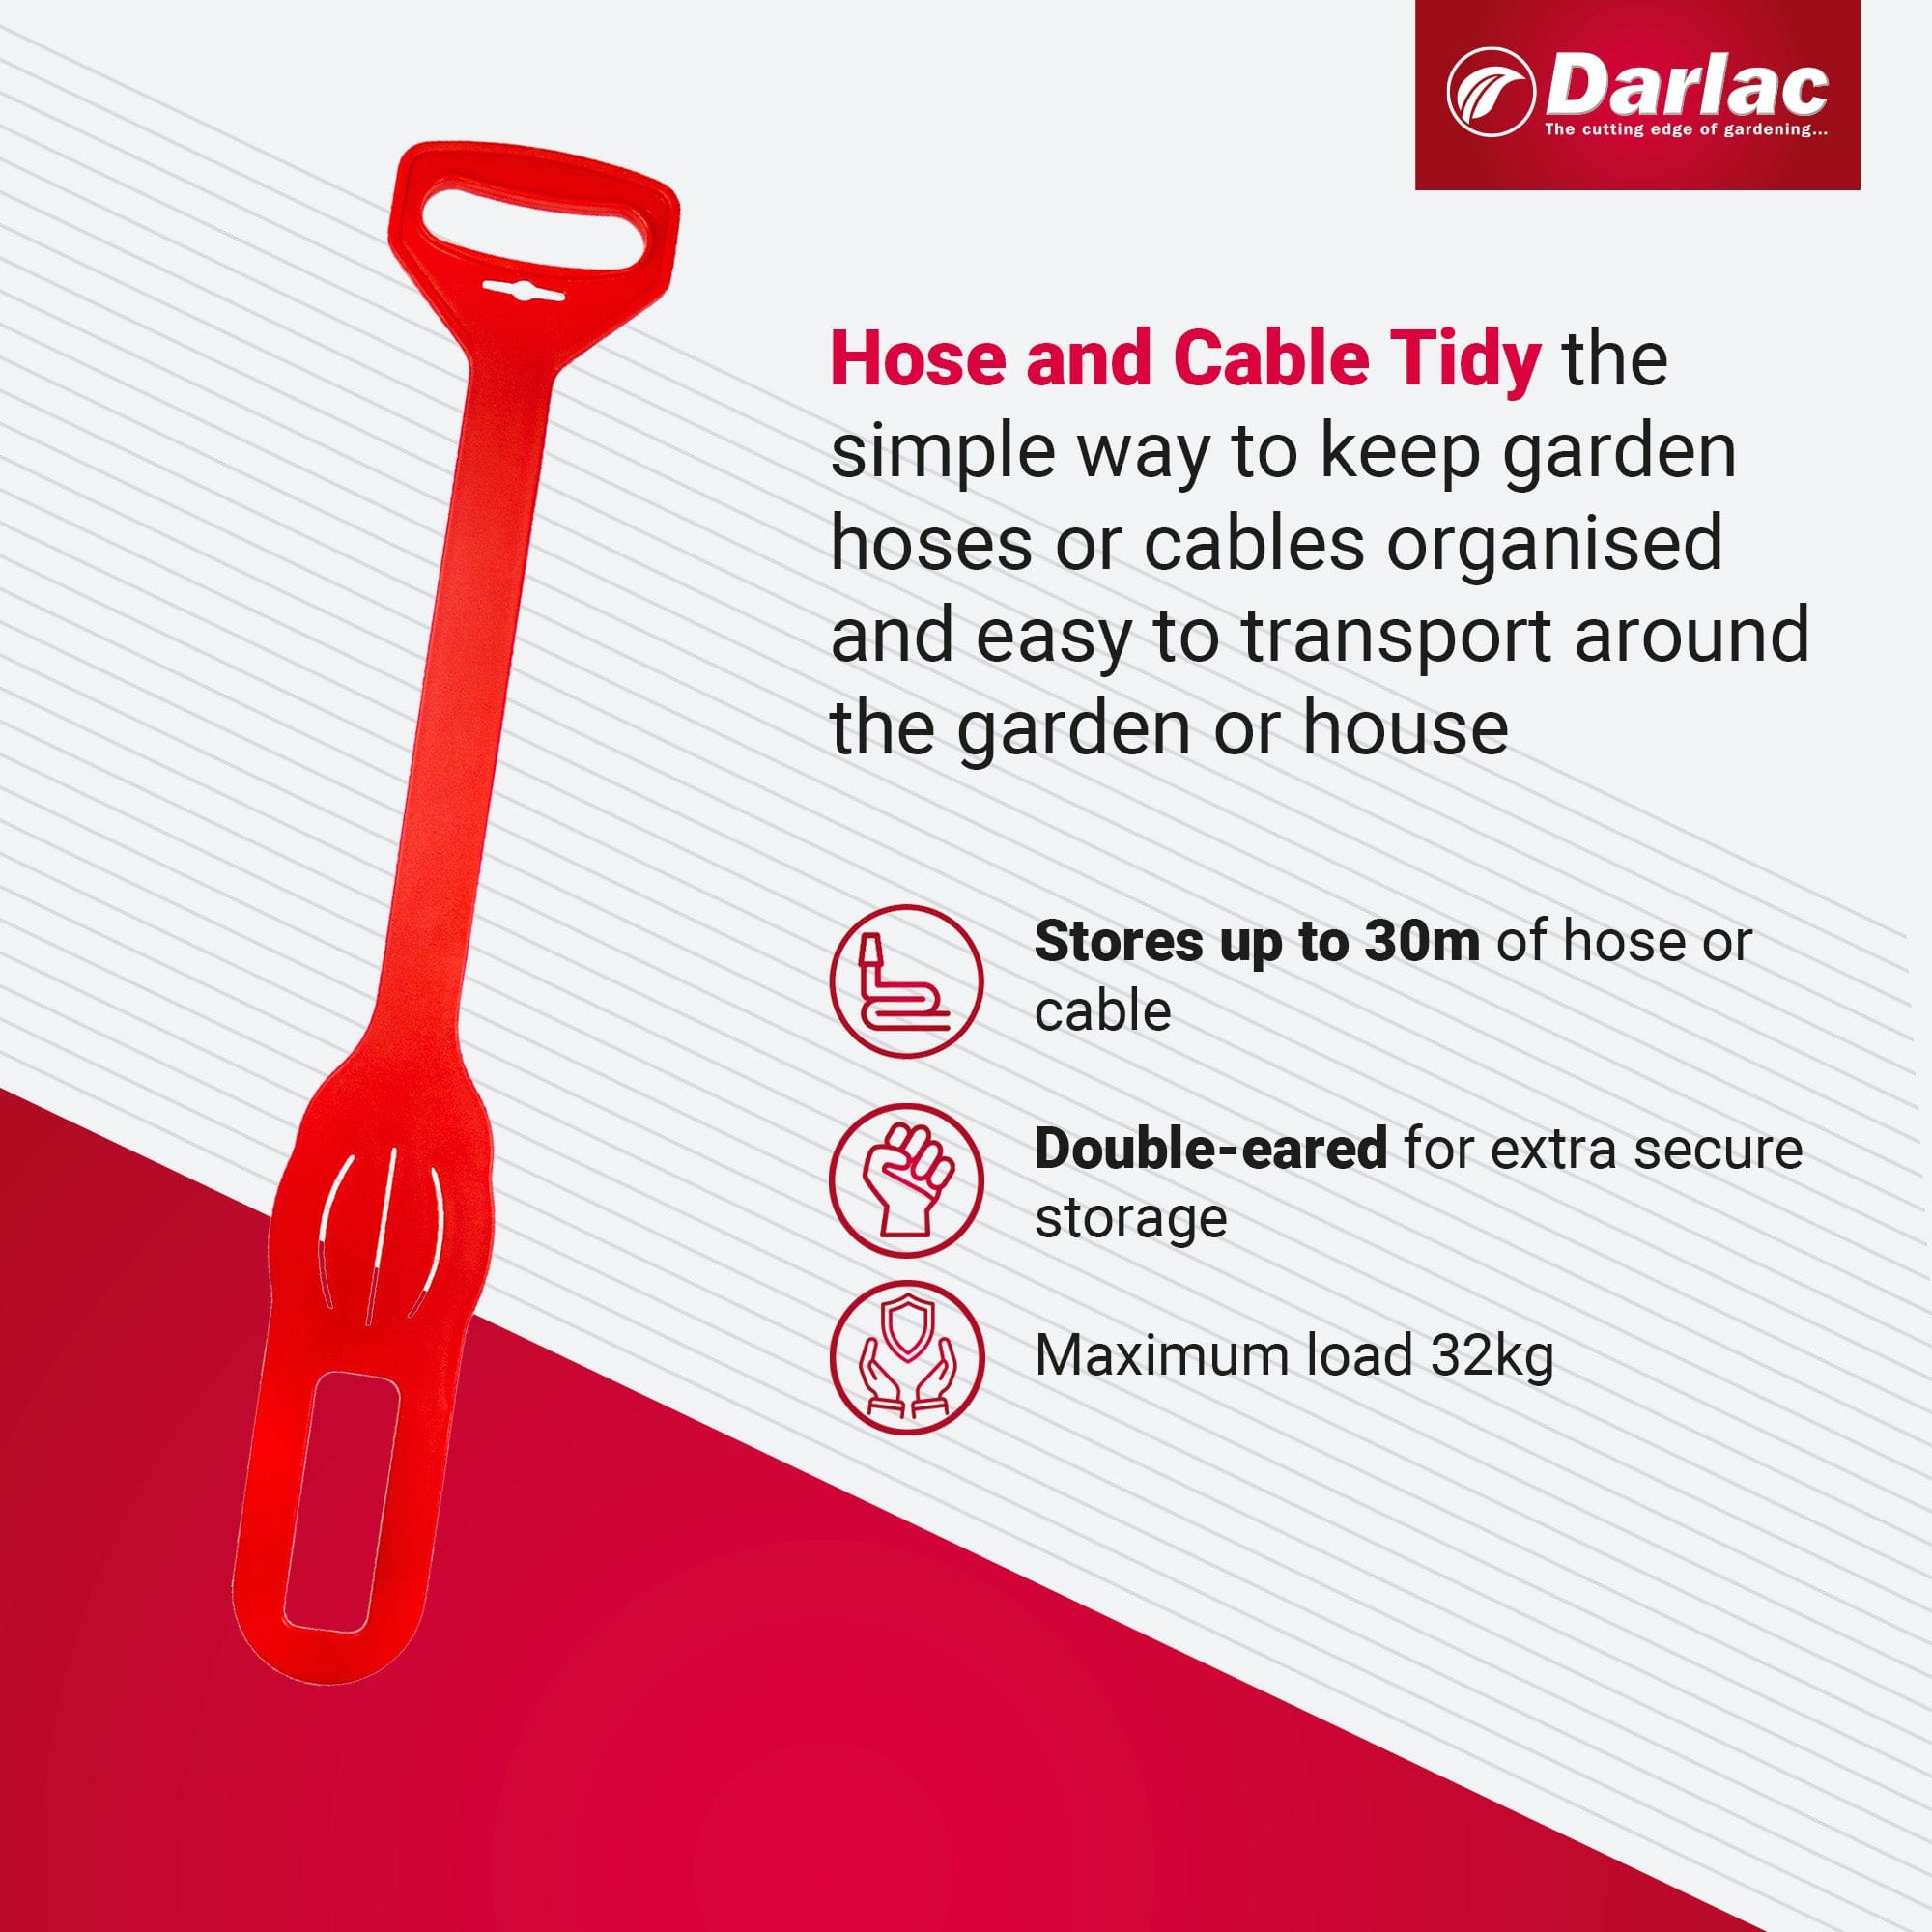 dt-brown HARDWARE Darlac Hose & Cable Tidy